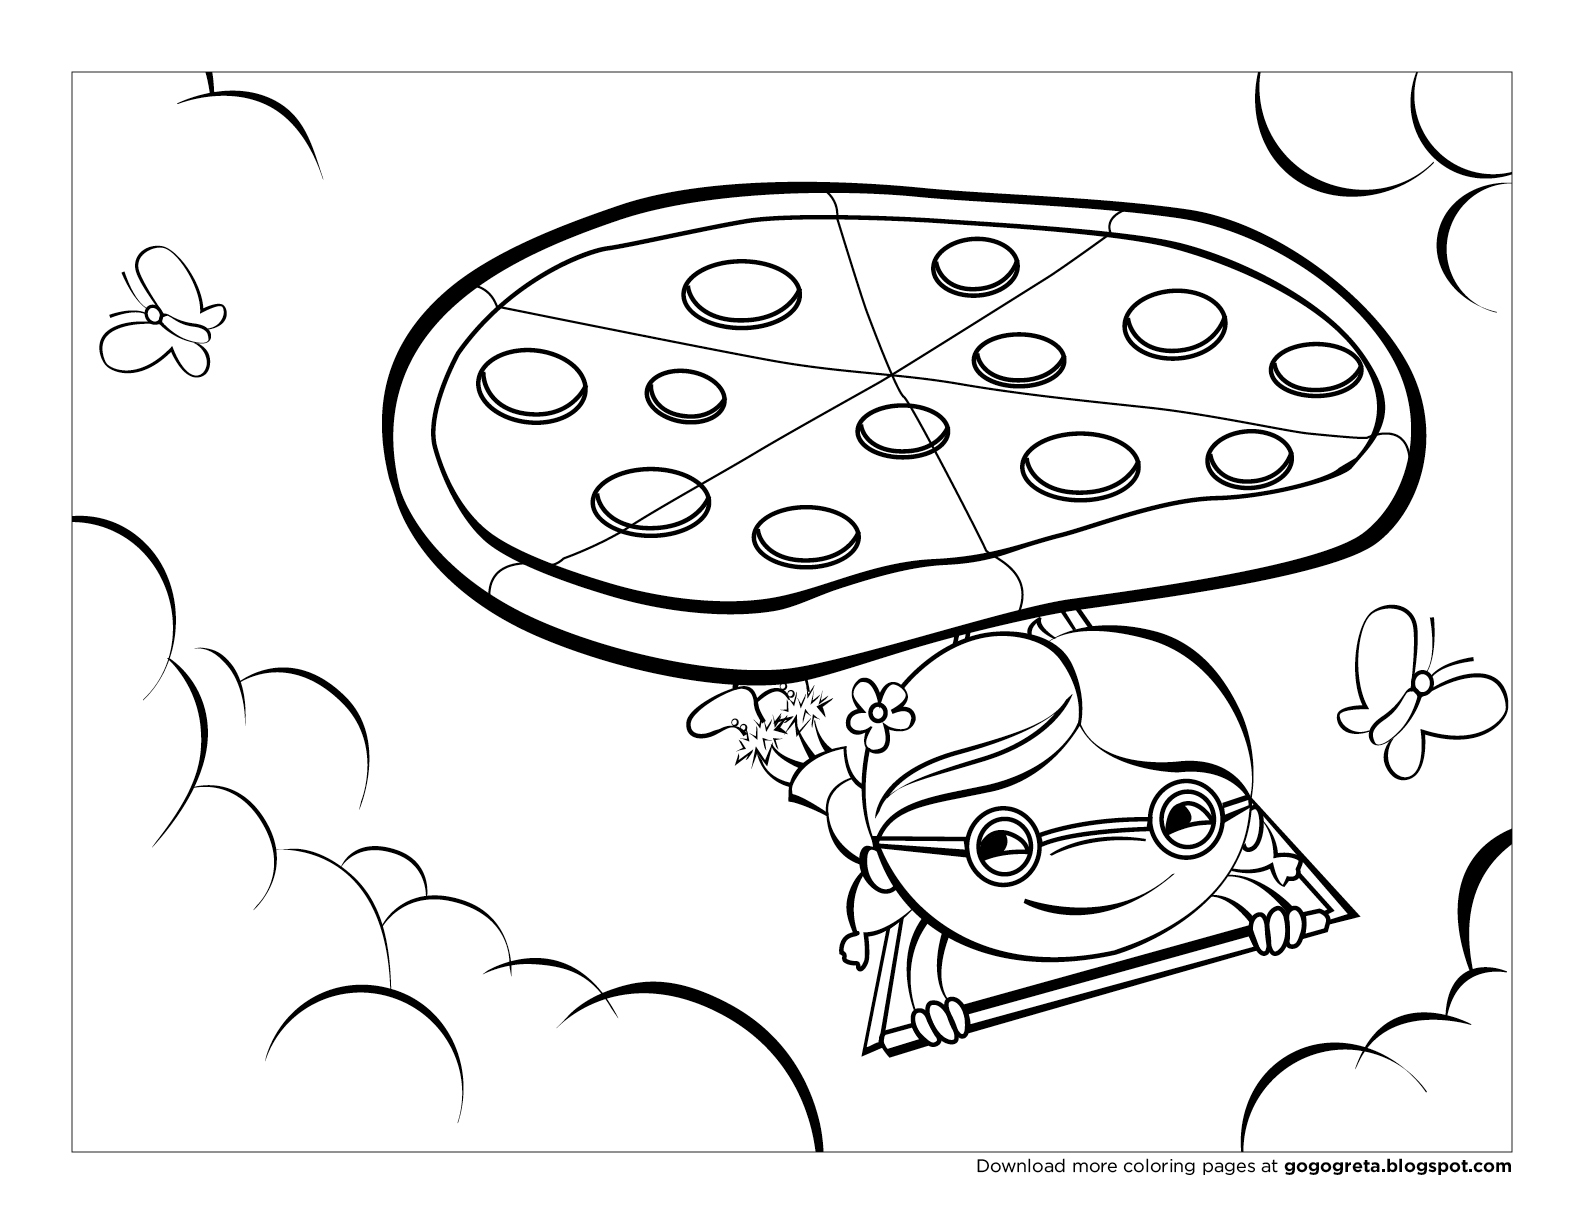  Pizza coloring pages | kids printable coloring pages | #38